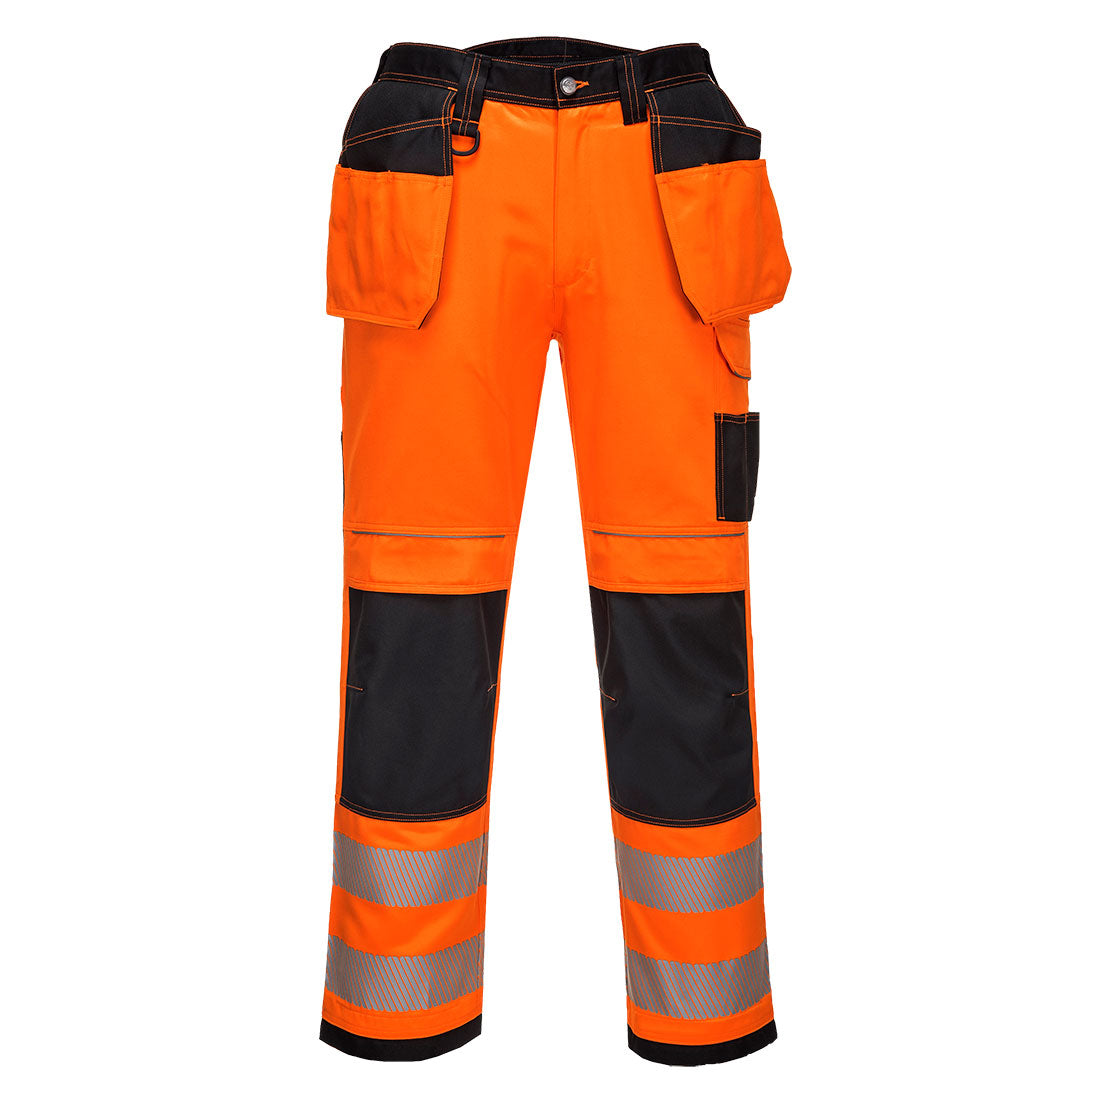 Portwest PW3 Two-Tone Hi-Vis Holster Work Trousers - T501